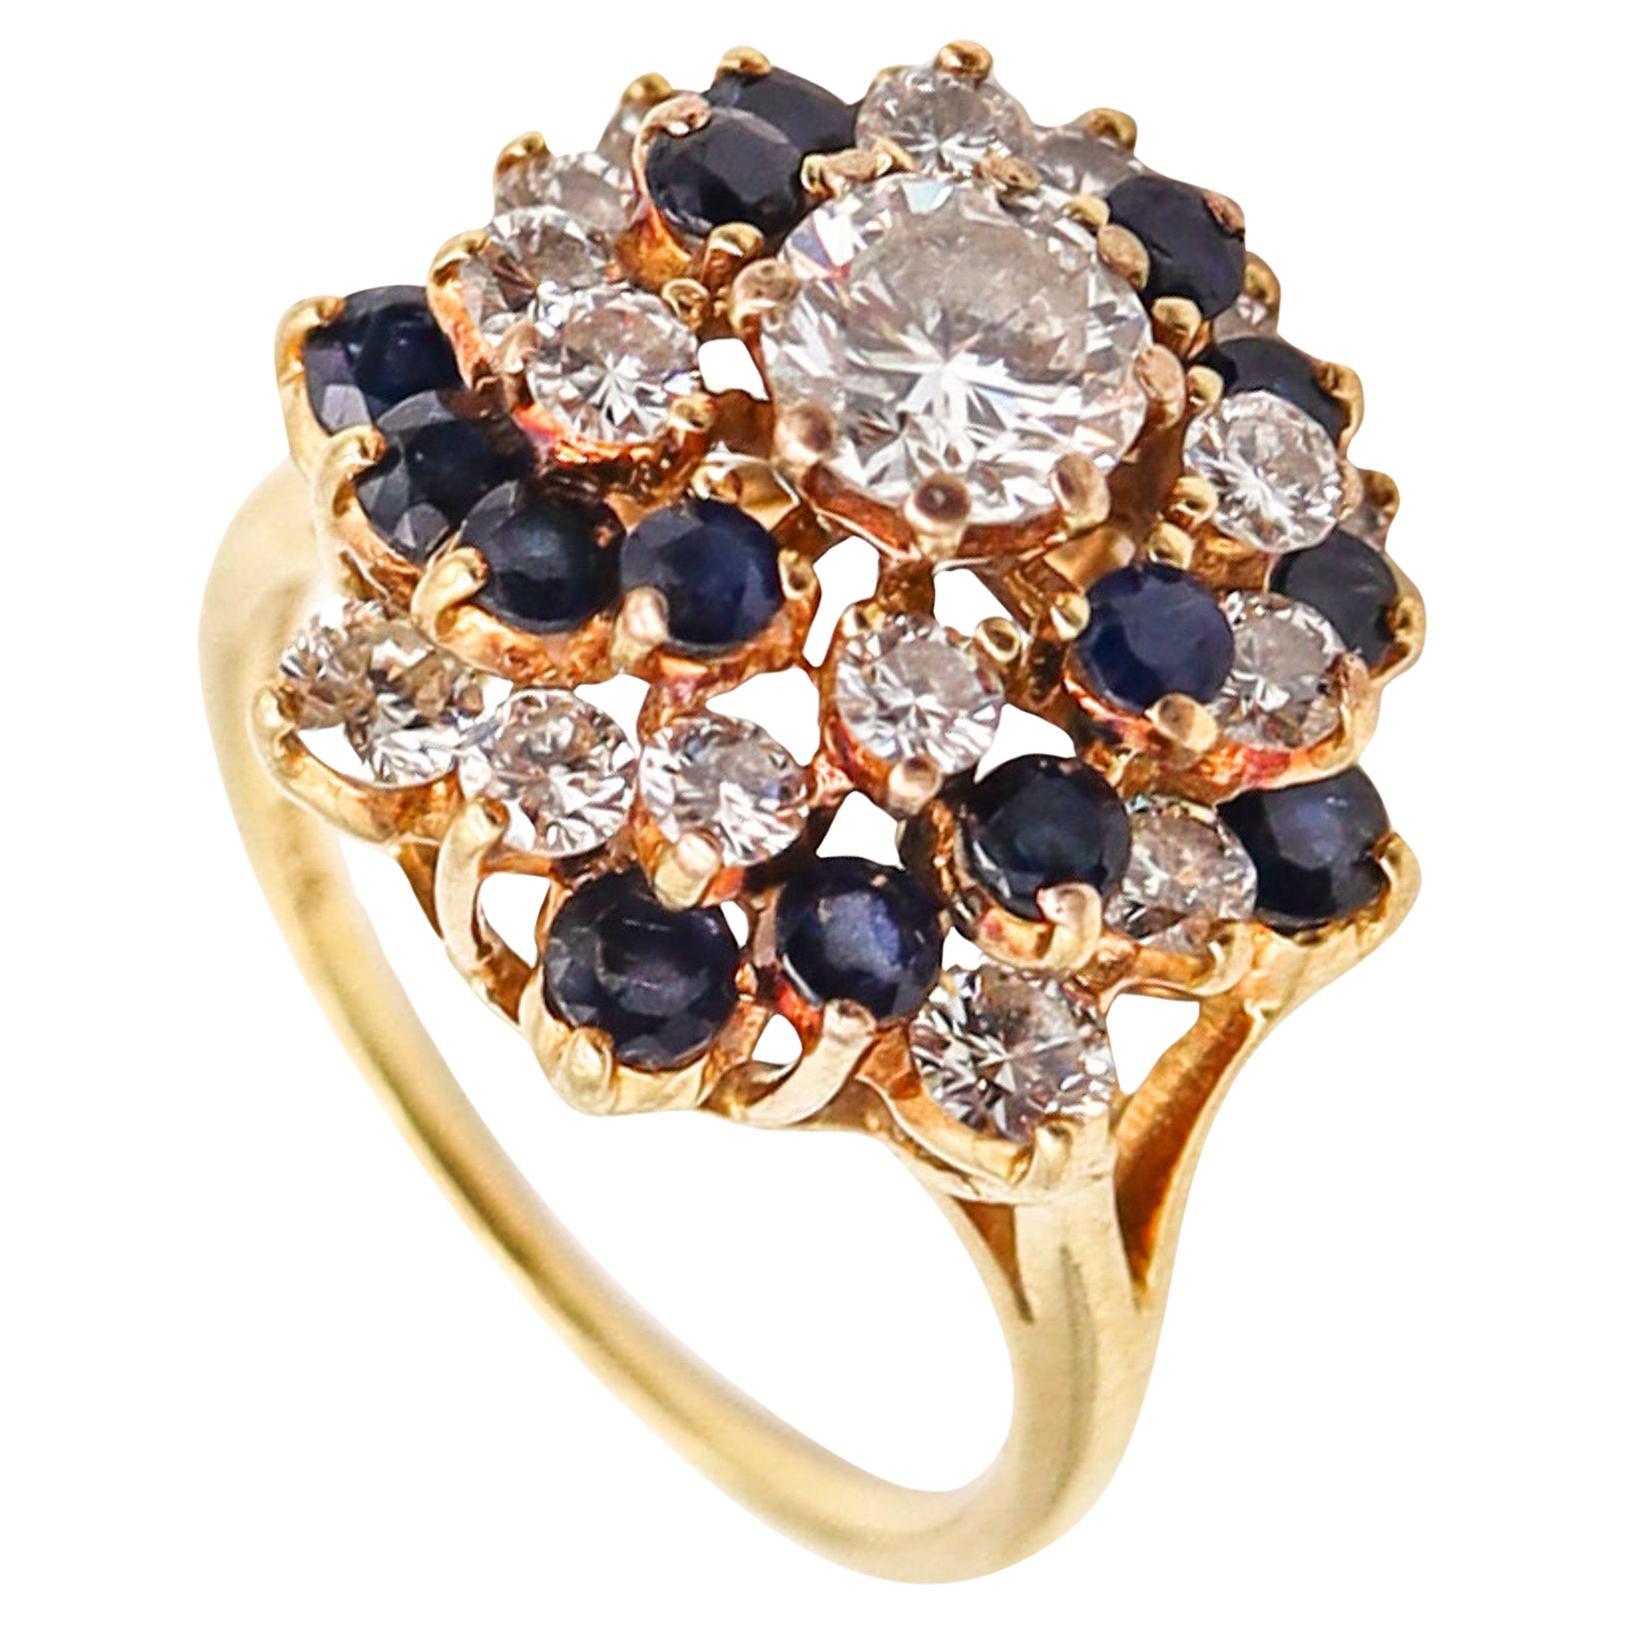 Tiffany & Co. Cluster Ring In 18Kt Gold With 2.58 Ctw In Diamonds And Sapphires